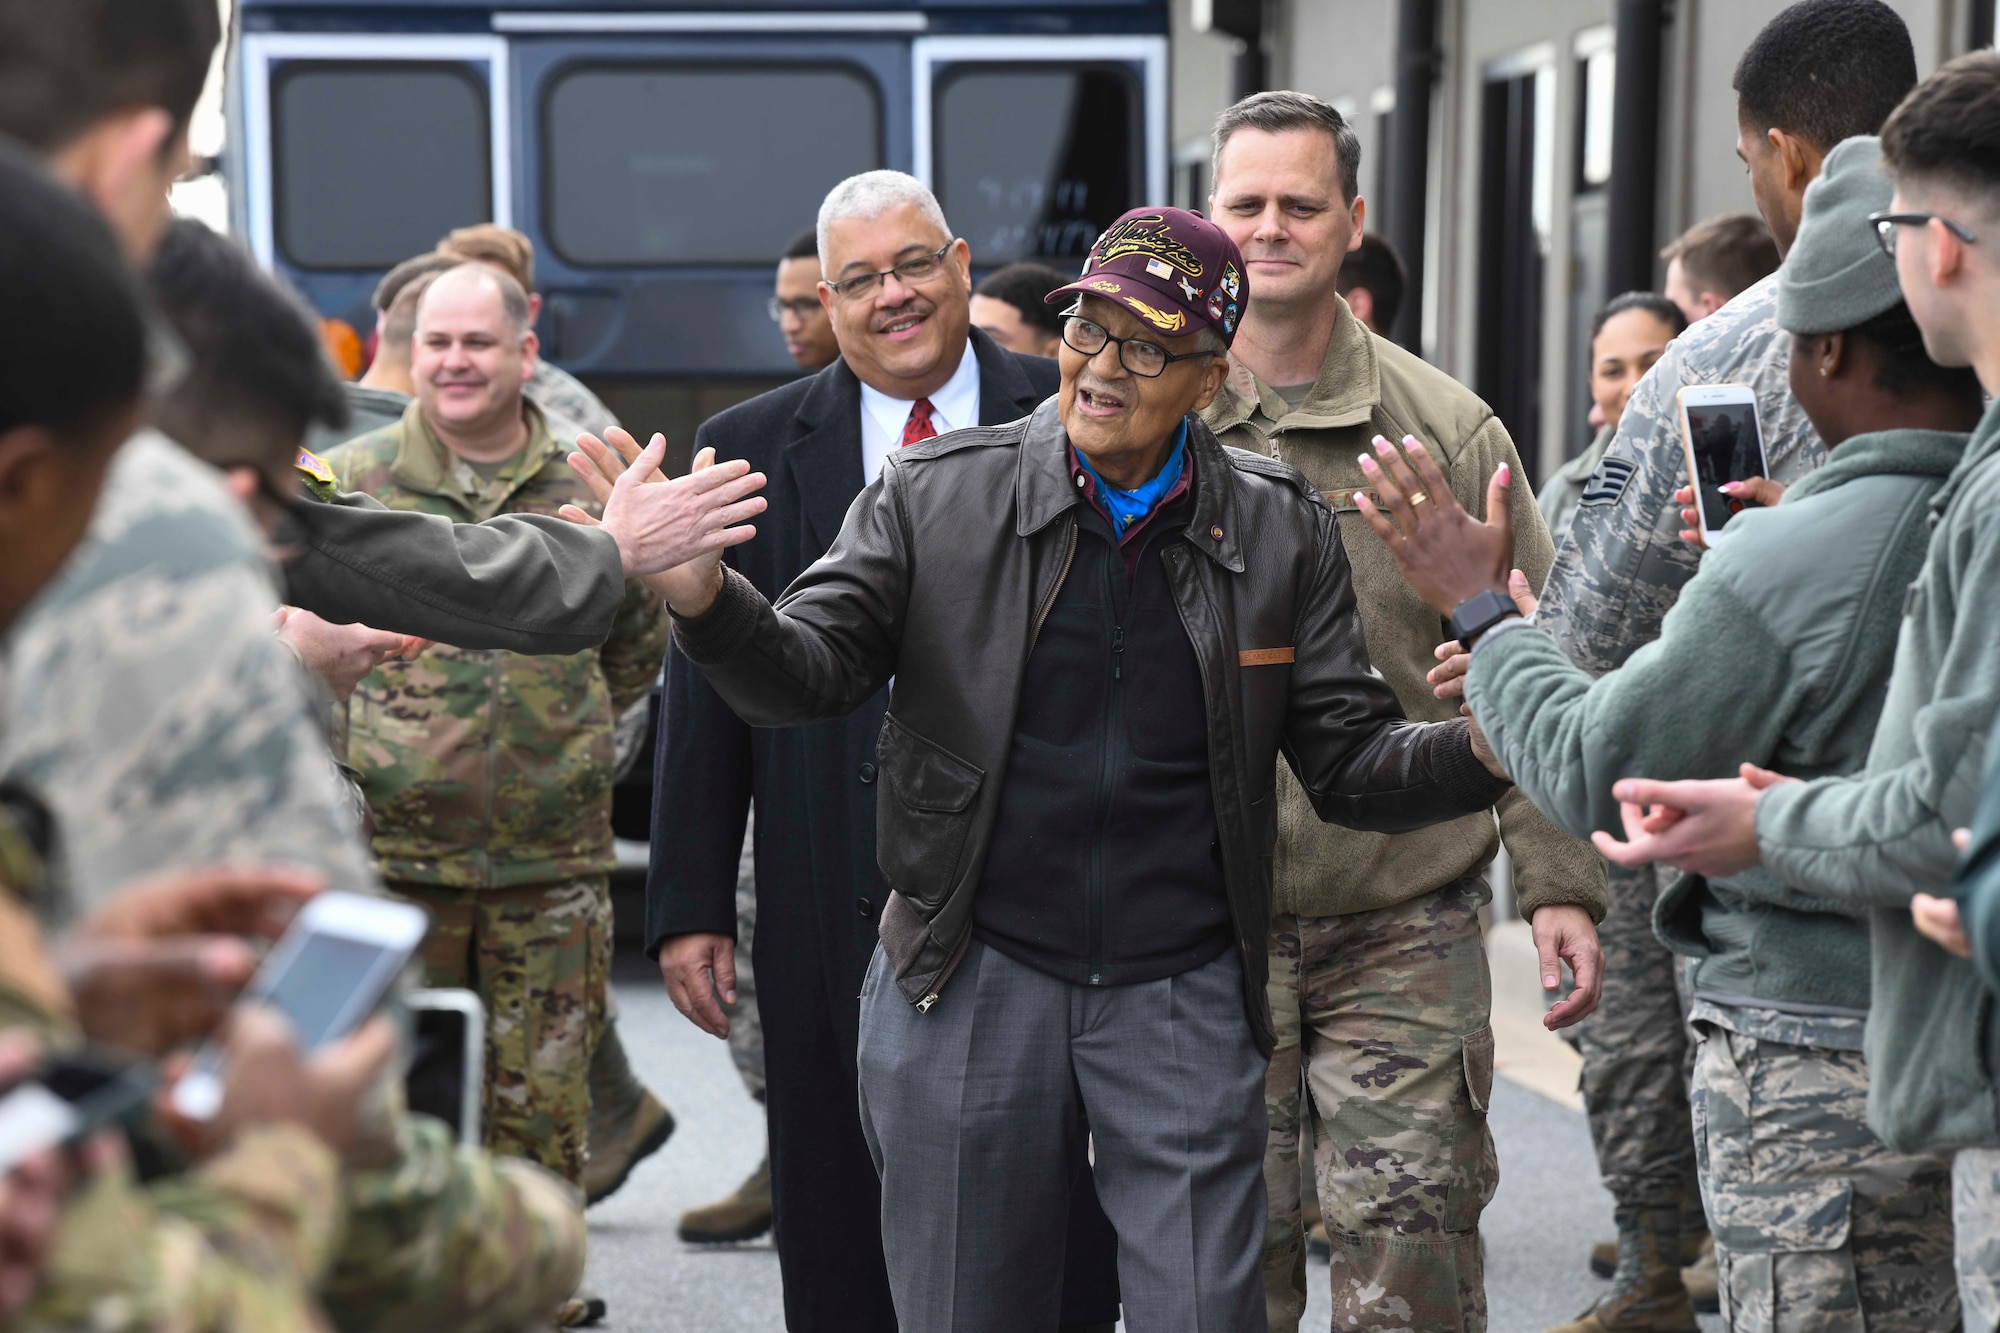 Former Tuskegee Airman, retired Col. Charles McGee, high-fives Airmen during his visit Dec. 6, 2019, at Dover Air Force Base, Del. He served a total of 30 years in the U.S. Air Force, beginning with the U.S. Army Air Corps, and flew a total of 409 combat missions in World War II, Korea and Vietnam. The Tuskegee program began in 1941 when the 99th Pursuit Squadron was established, and its Airmen were the first ever African-American military aviators in the U.S. Army Air Corps. (U.S. Air Force photo by Senior Airman Christopher Quail)